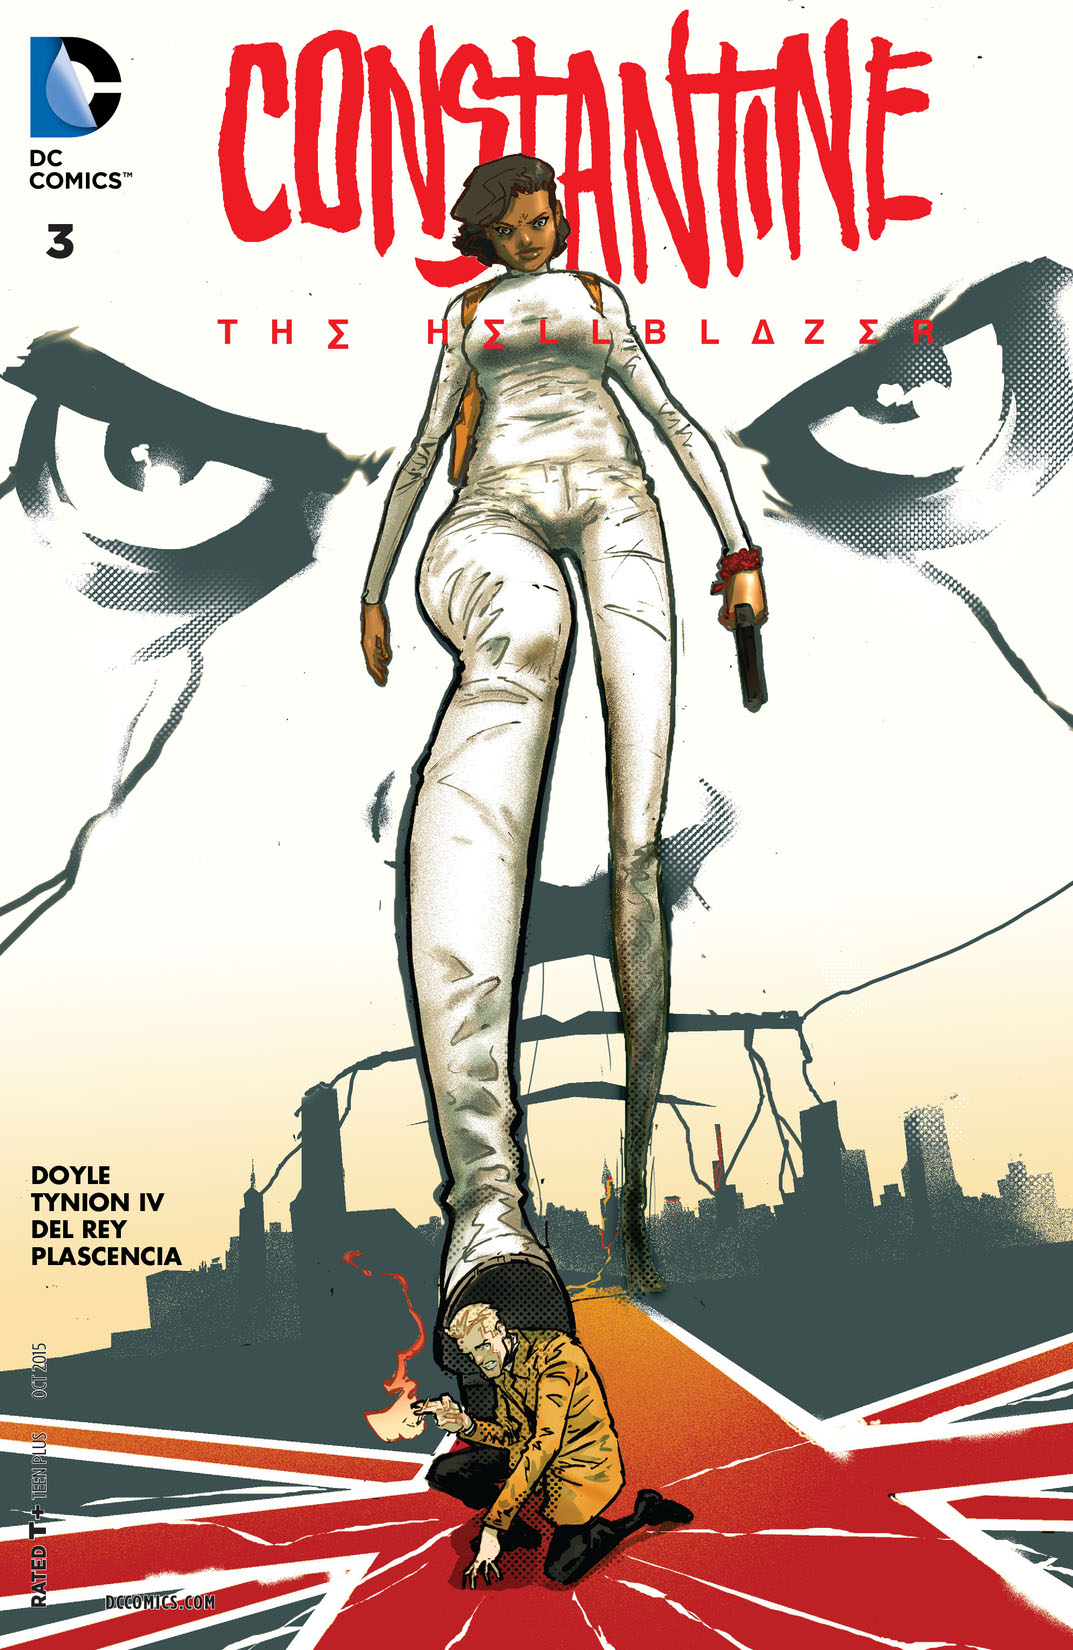 Constantine: The Hellblazer #3 preview images